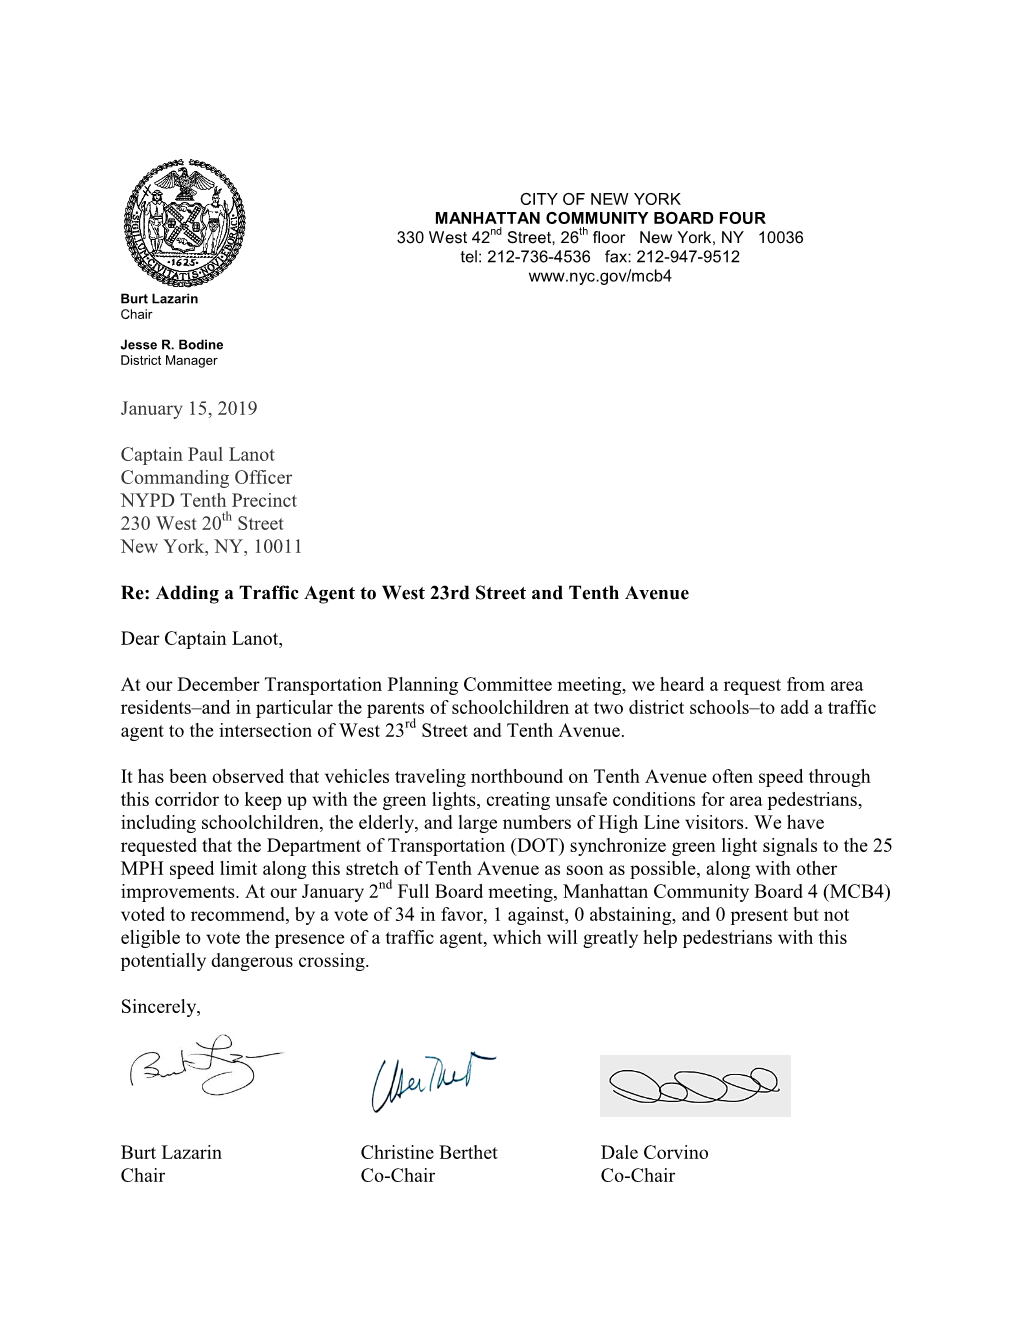 January 15, 2019 Captain Paul Lanot Commanding Officer NYPD Tenth Precinct 230 West 20 Street New York, NY, 10011 Re: Adding A